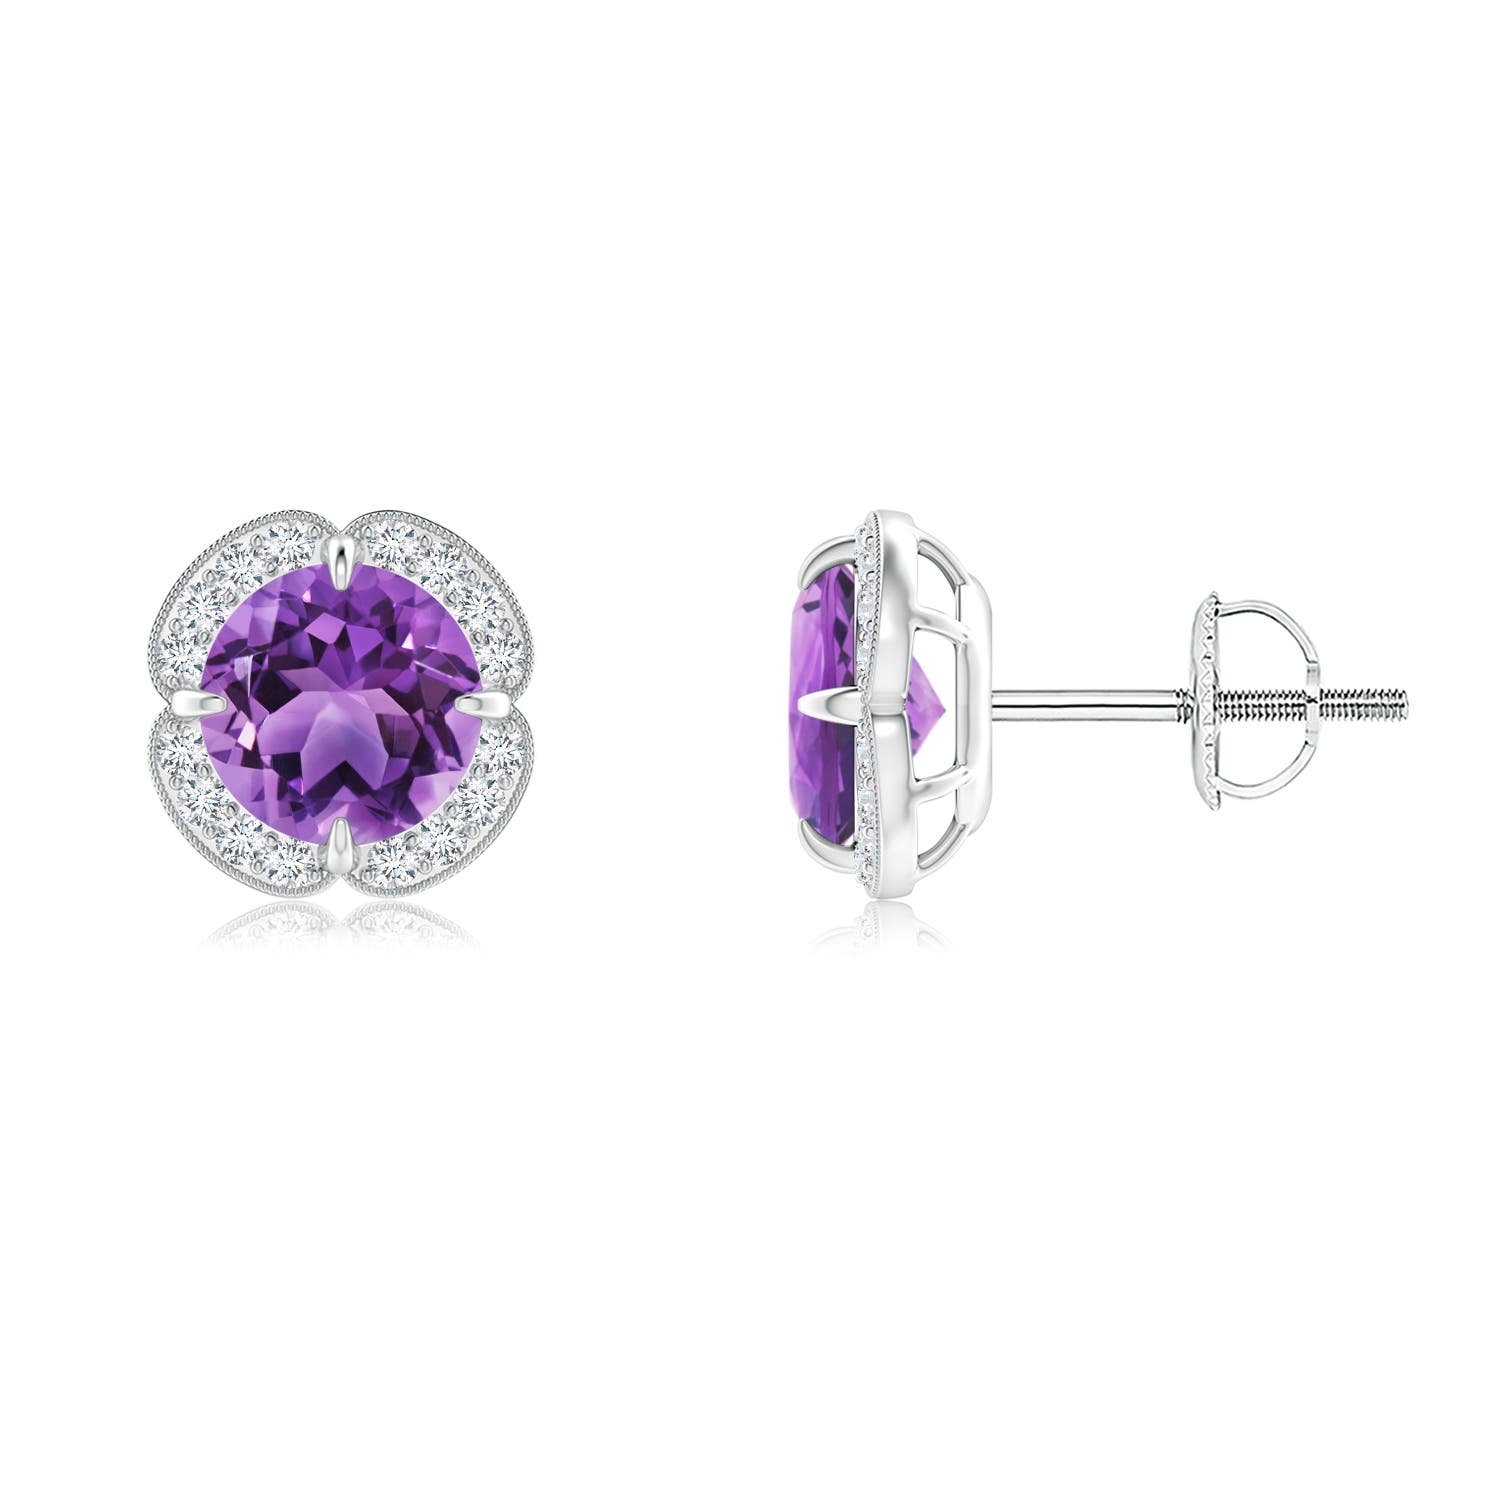 AA - Amethyst / 1.79 CT / 14 KT White Gold